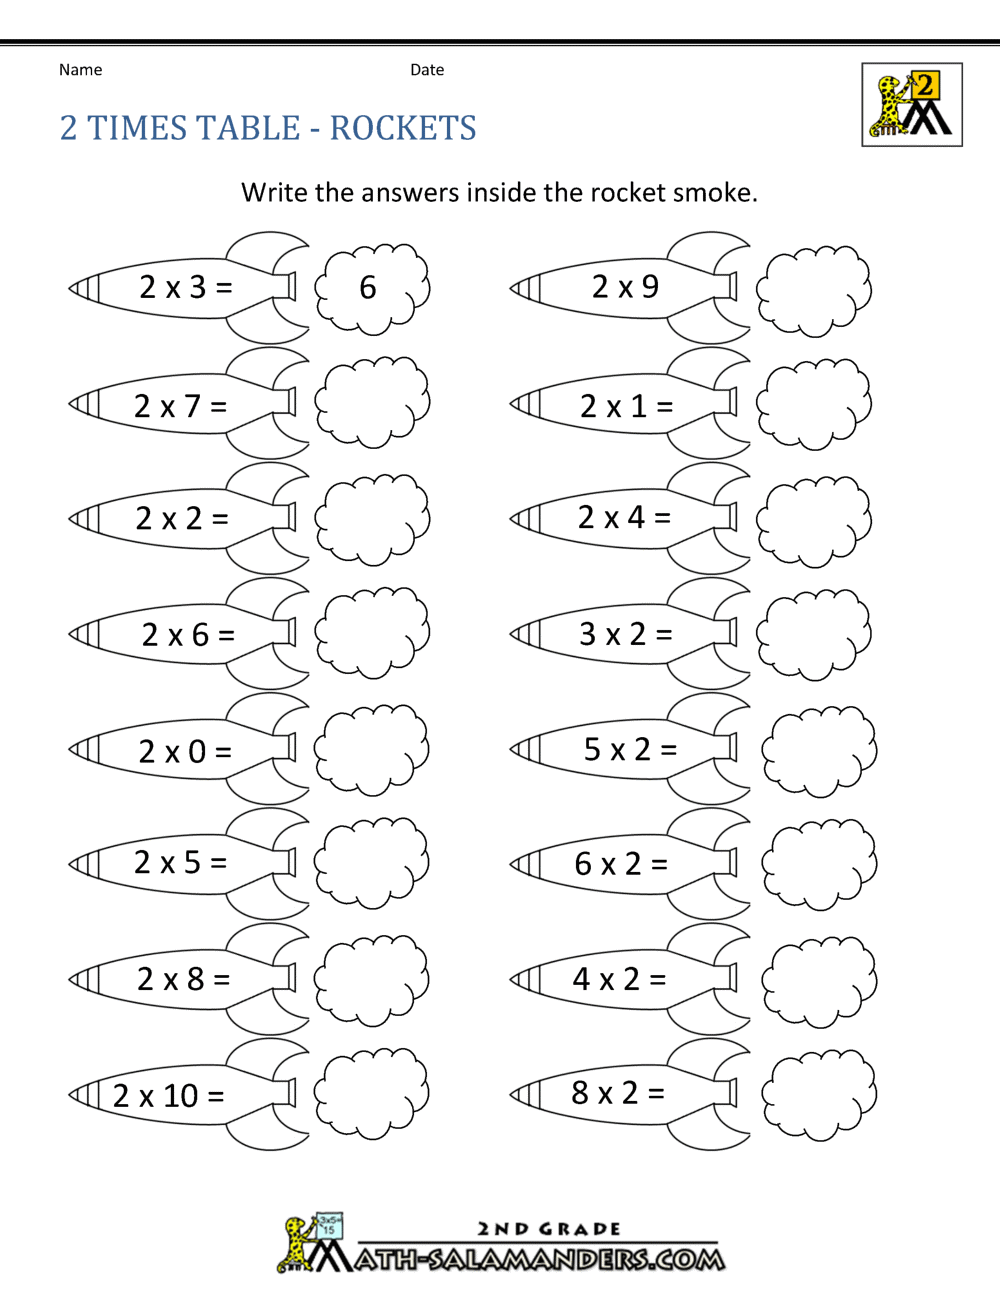 25 Times Table With 2 Times Table Worksheet